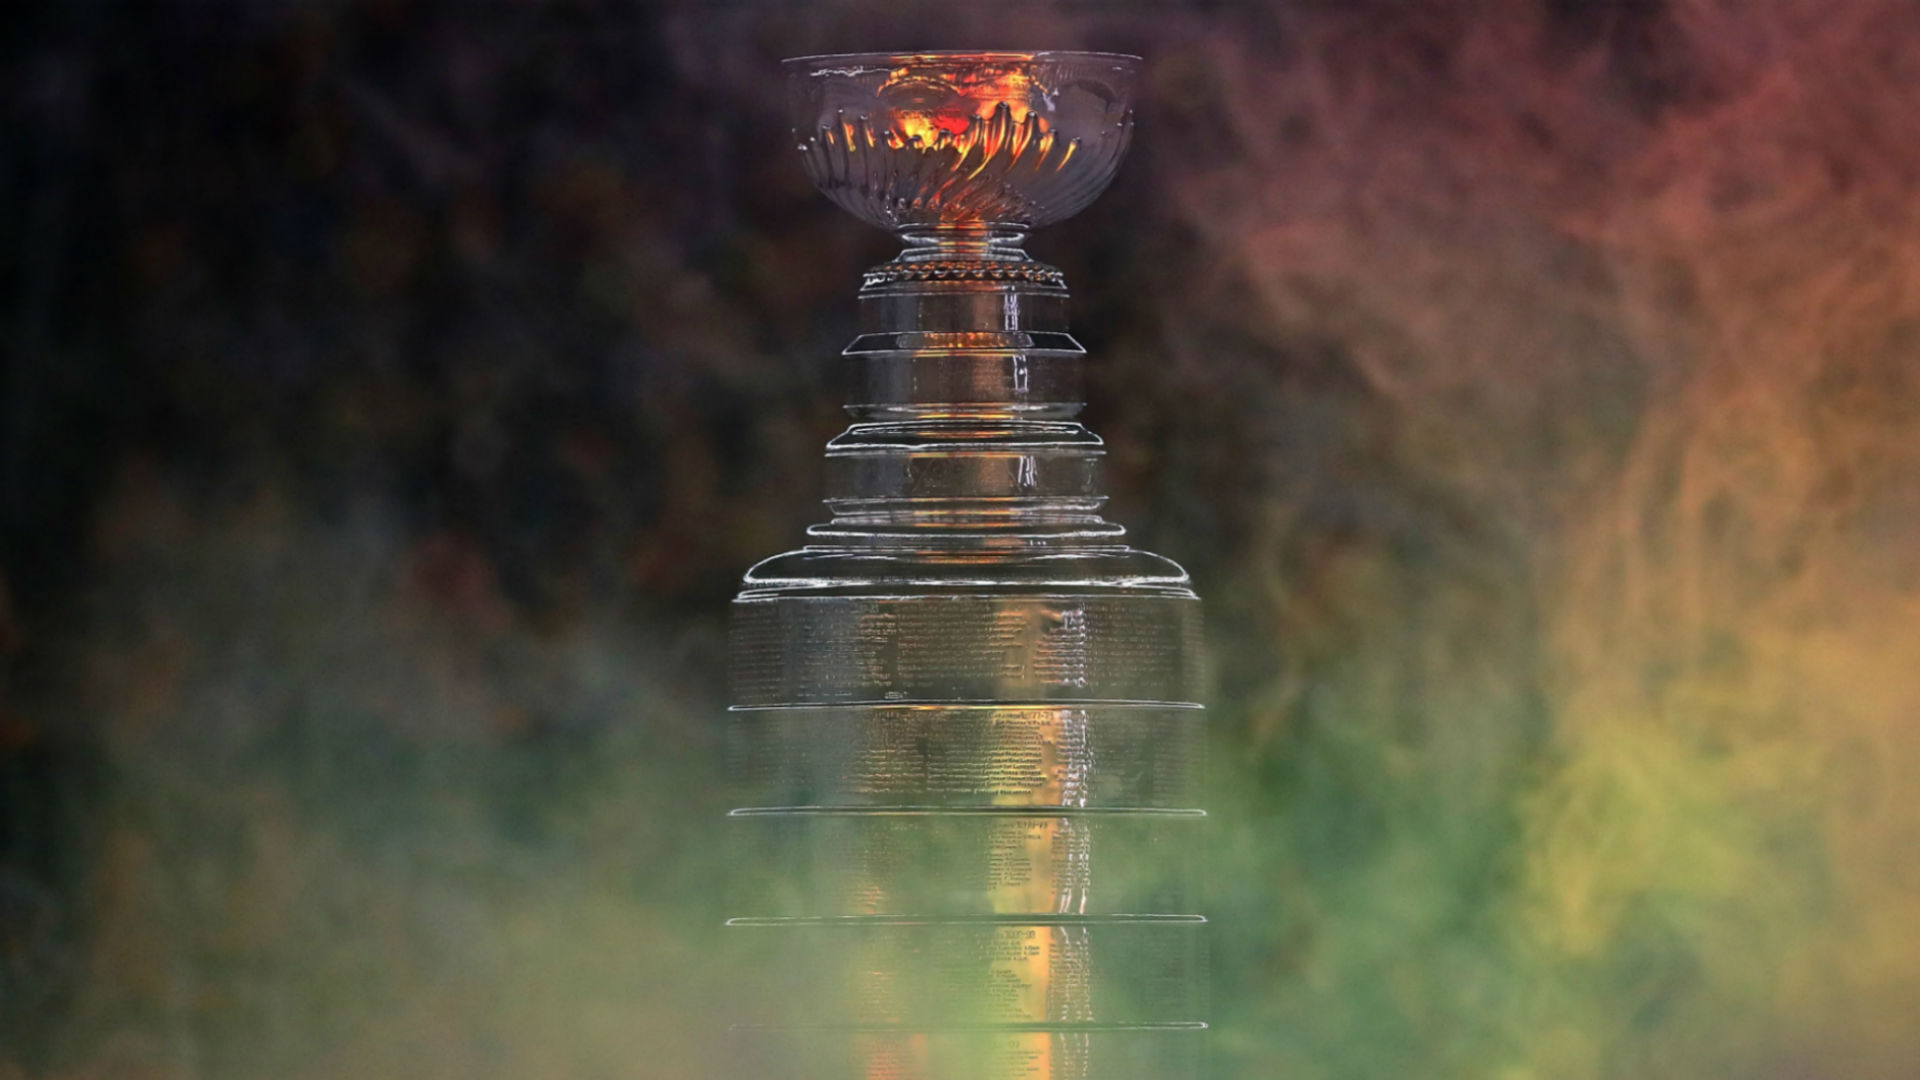 NHL playoffs schedule 2019: Full bracket, dates, times, TV channels for every series ...1920 x 1080